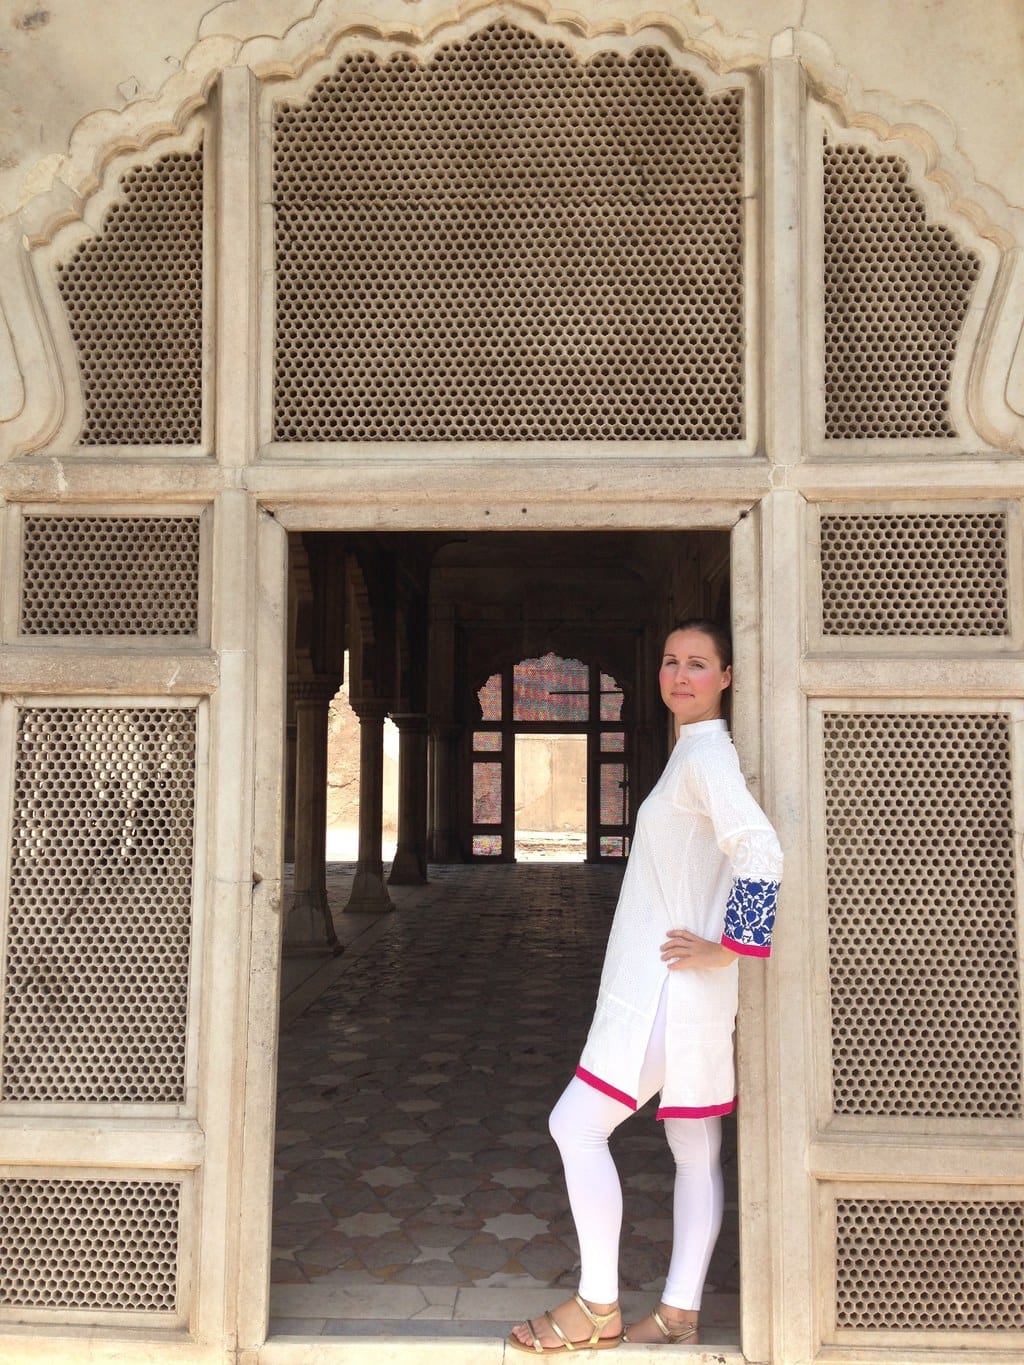 At the Fort in Lahore